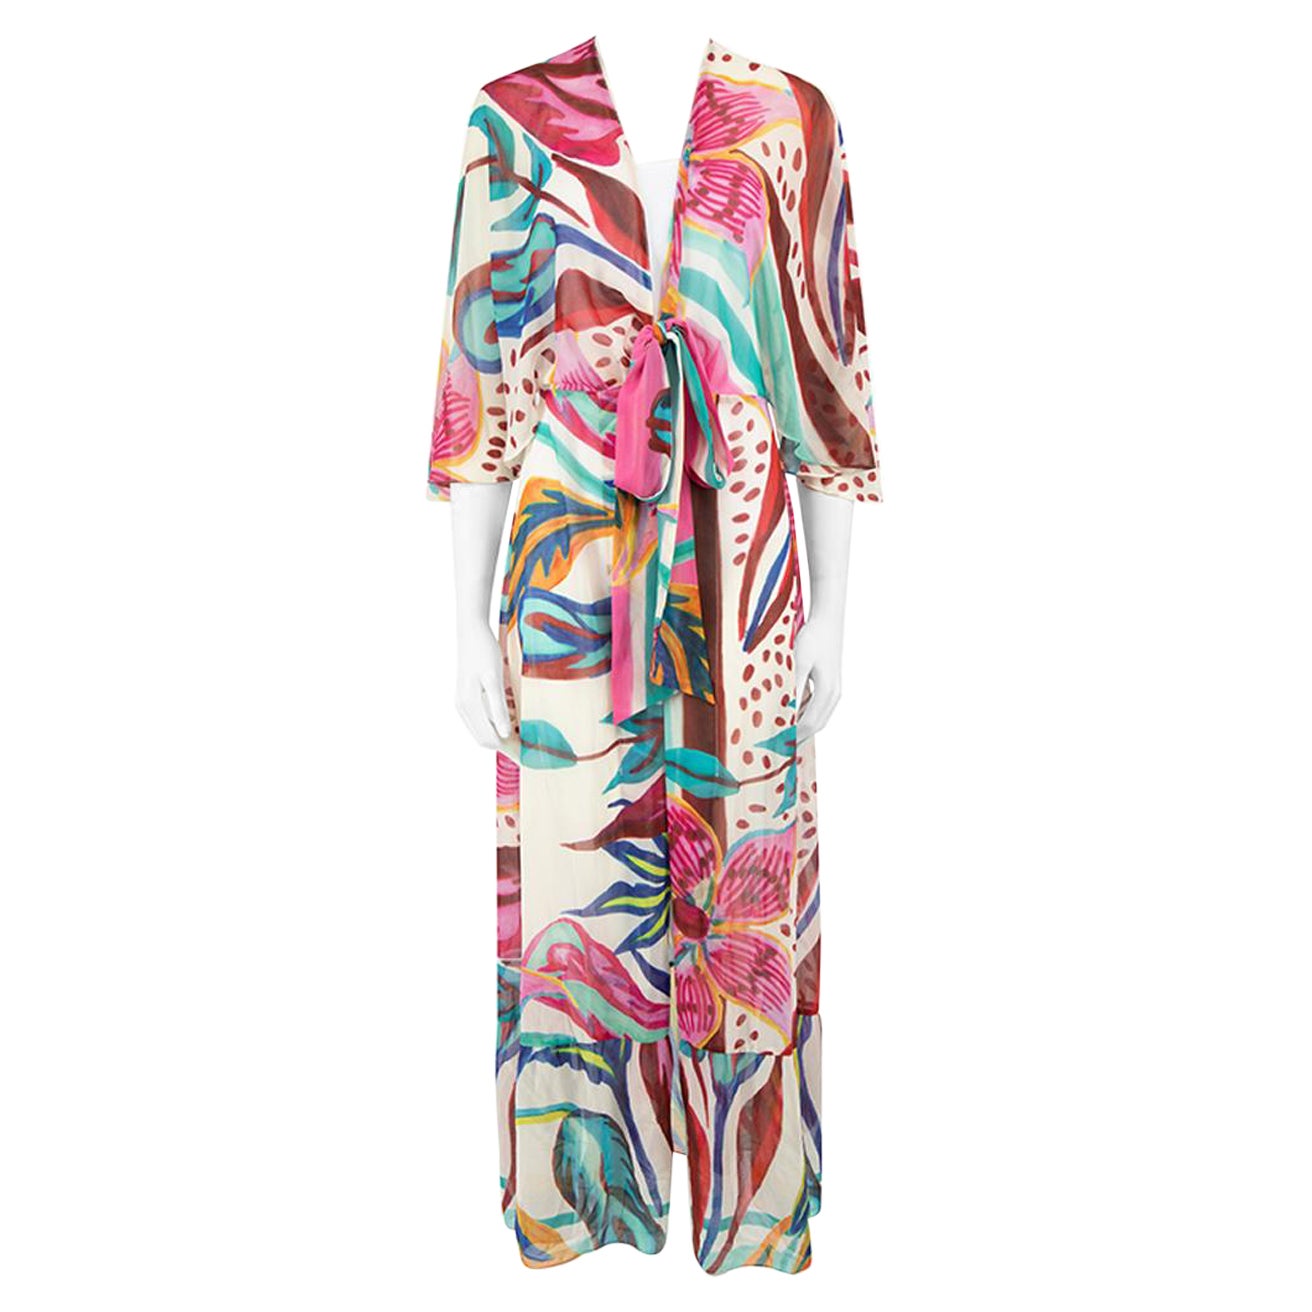 PatBO Abstract Print Sheer Maxi Cover Up Dress Size S For Sale